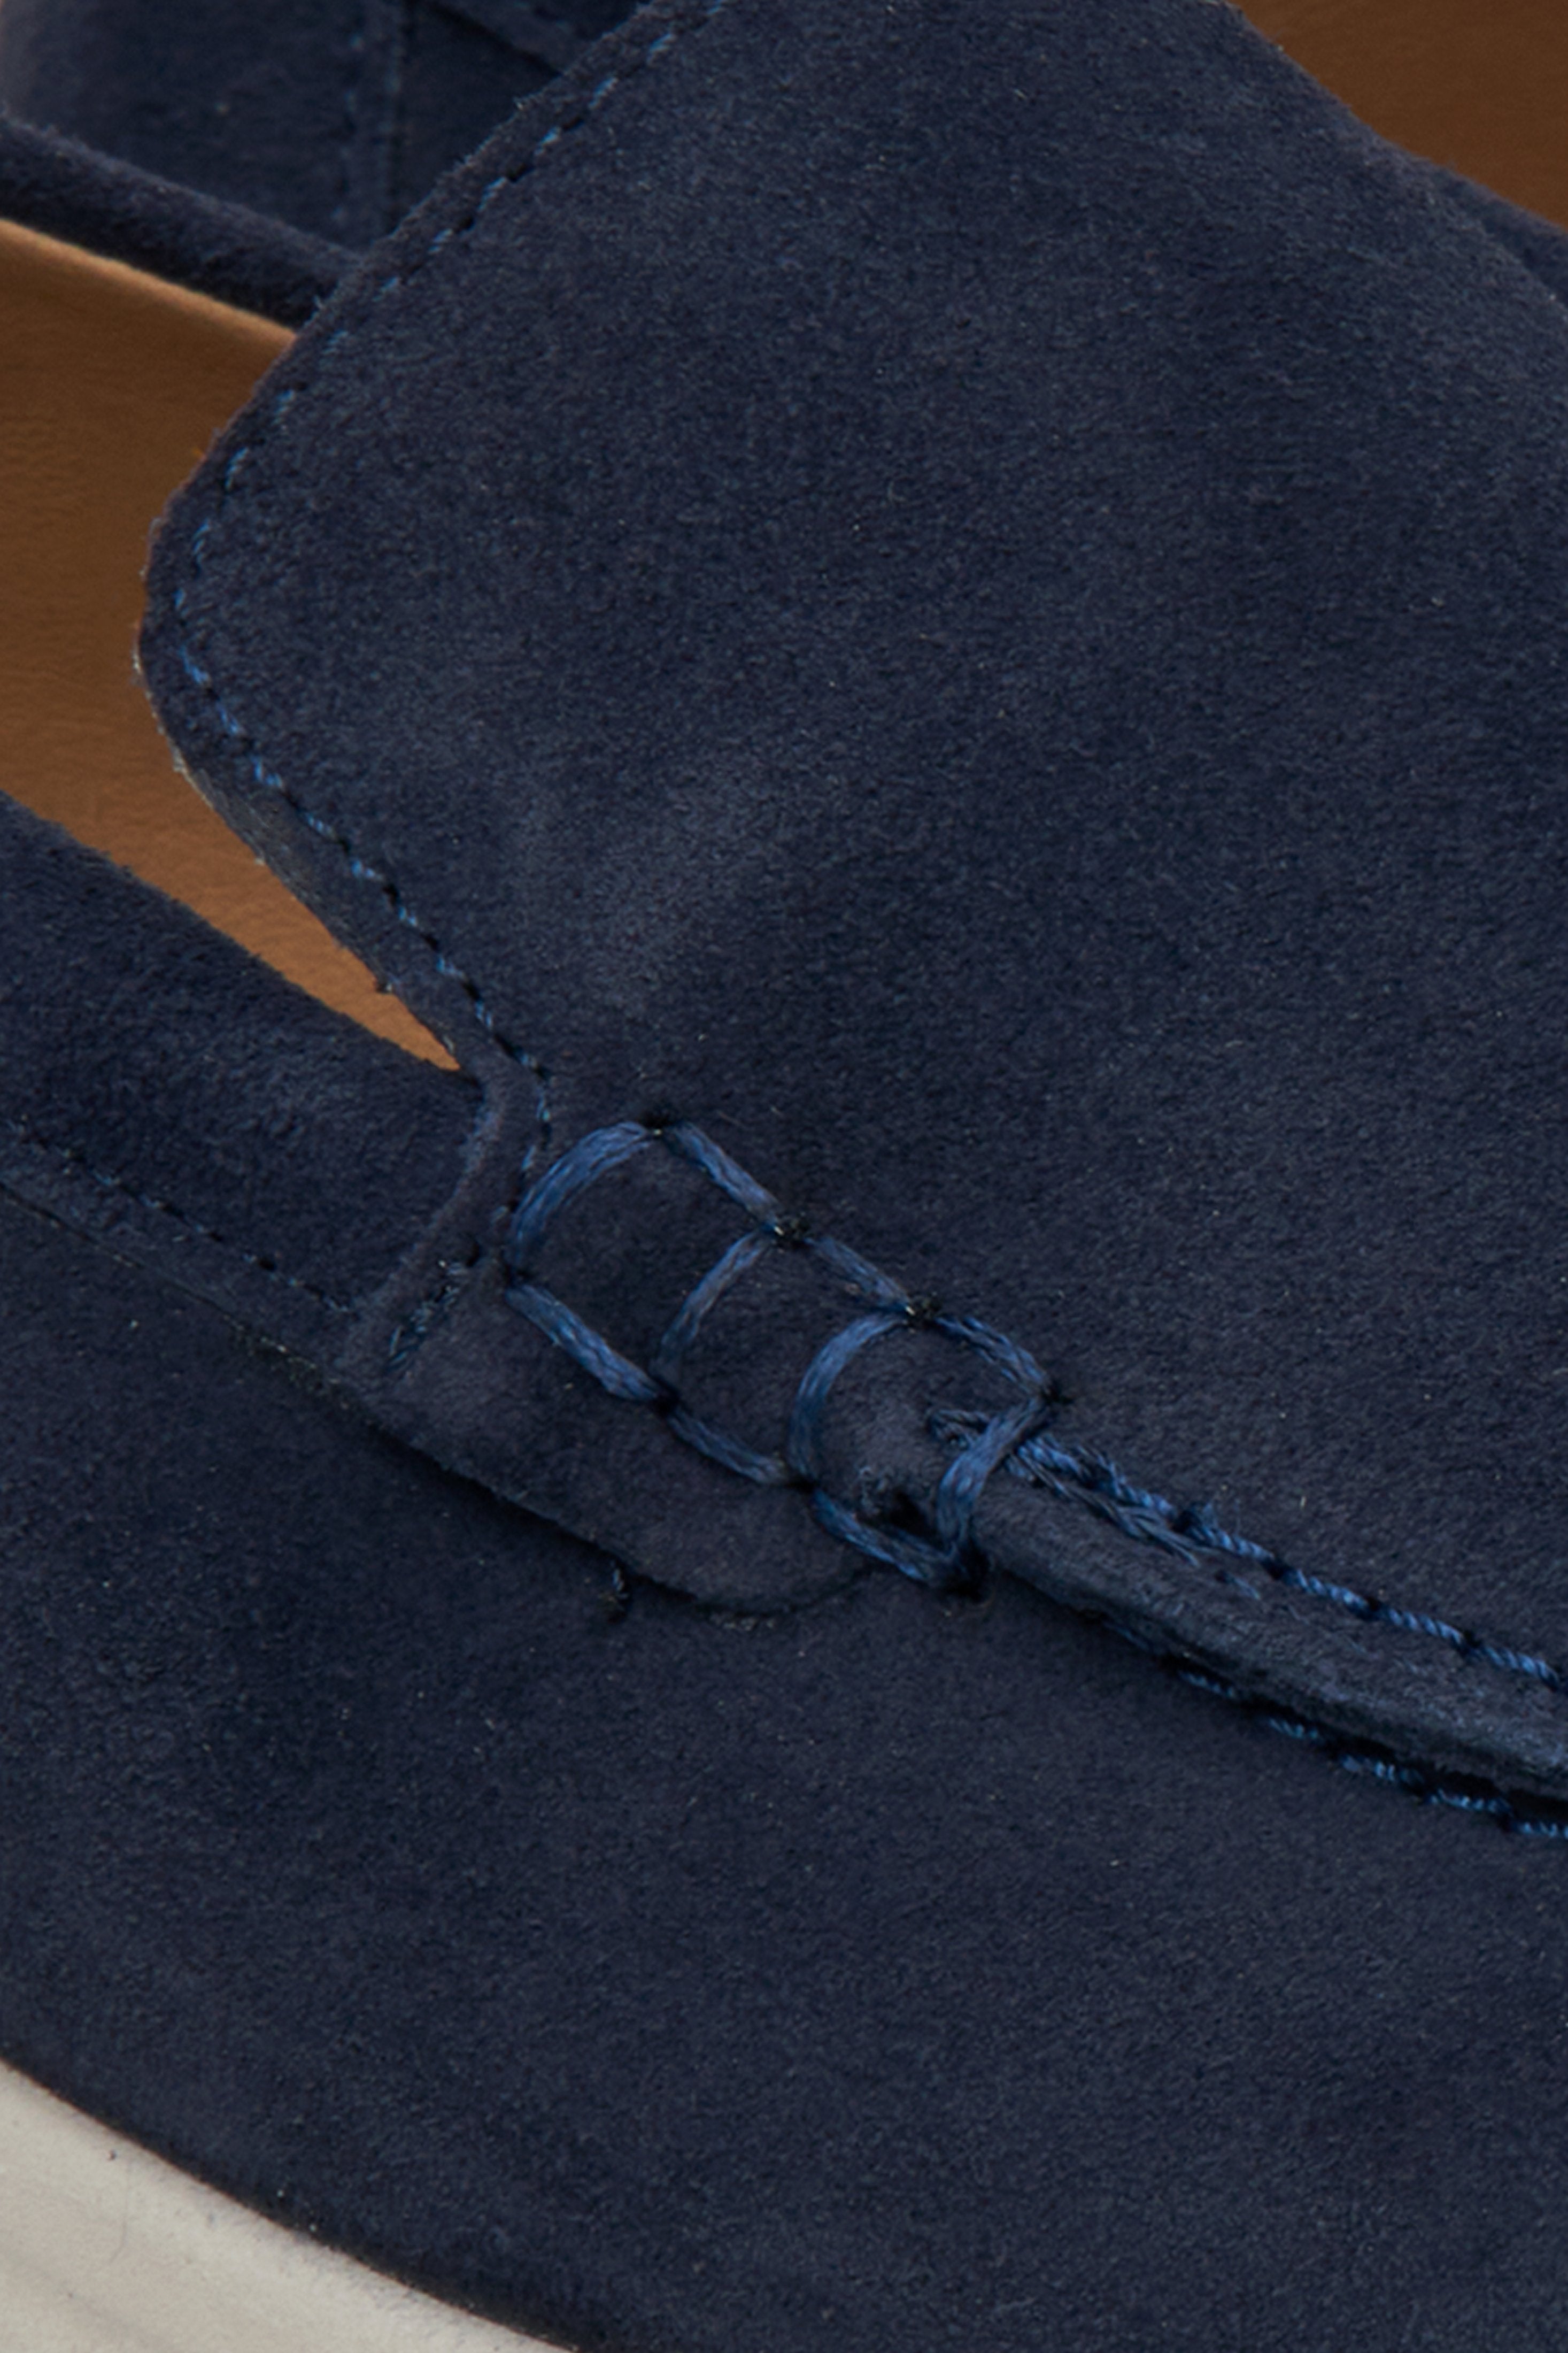 Women's loafers in navy blue velour - close-up on details.